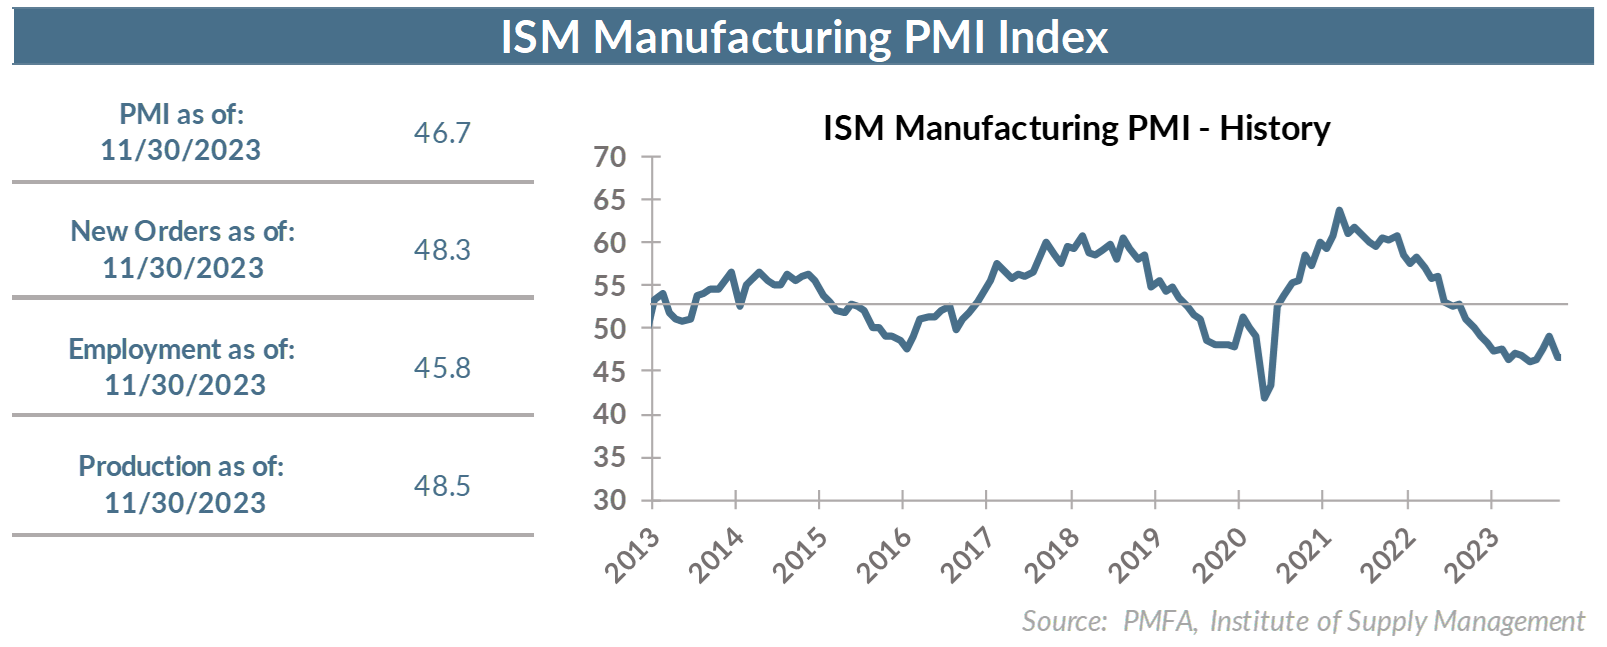 ISM Manufacturing PMI Index chart